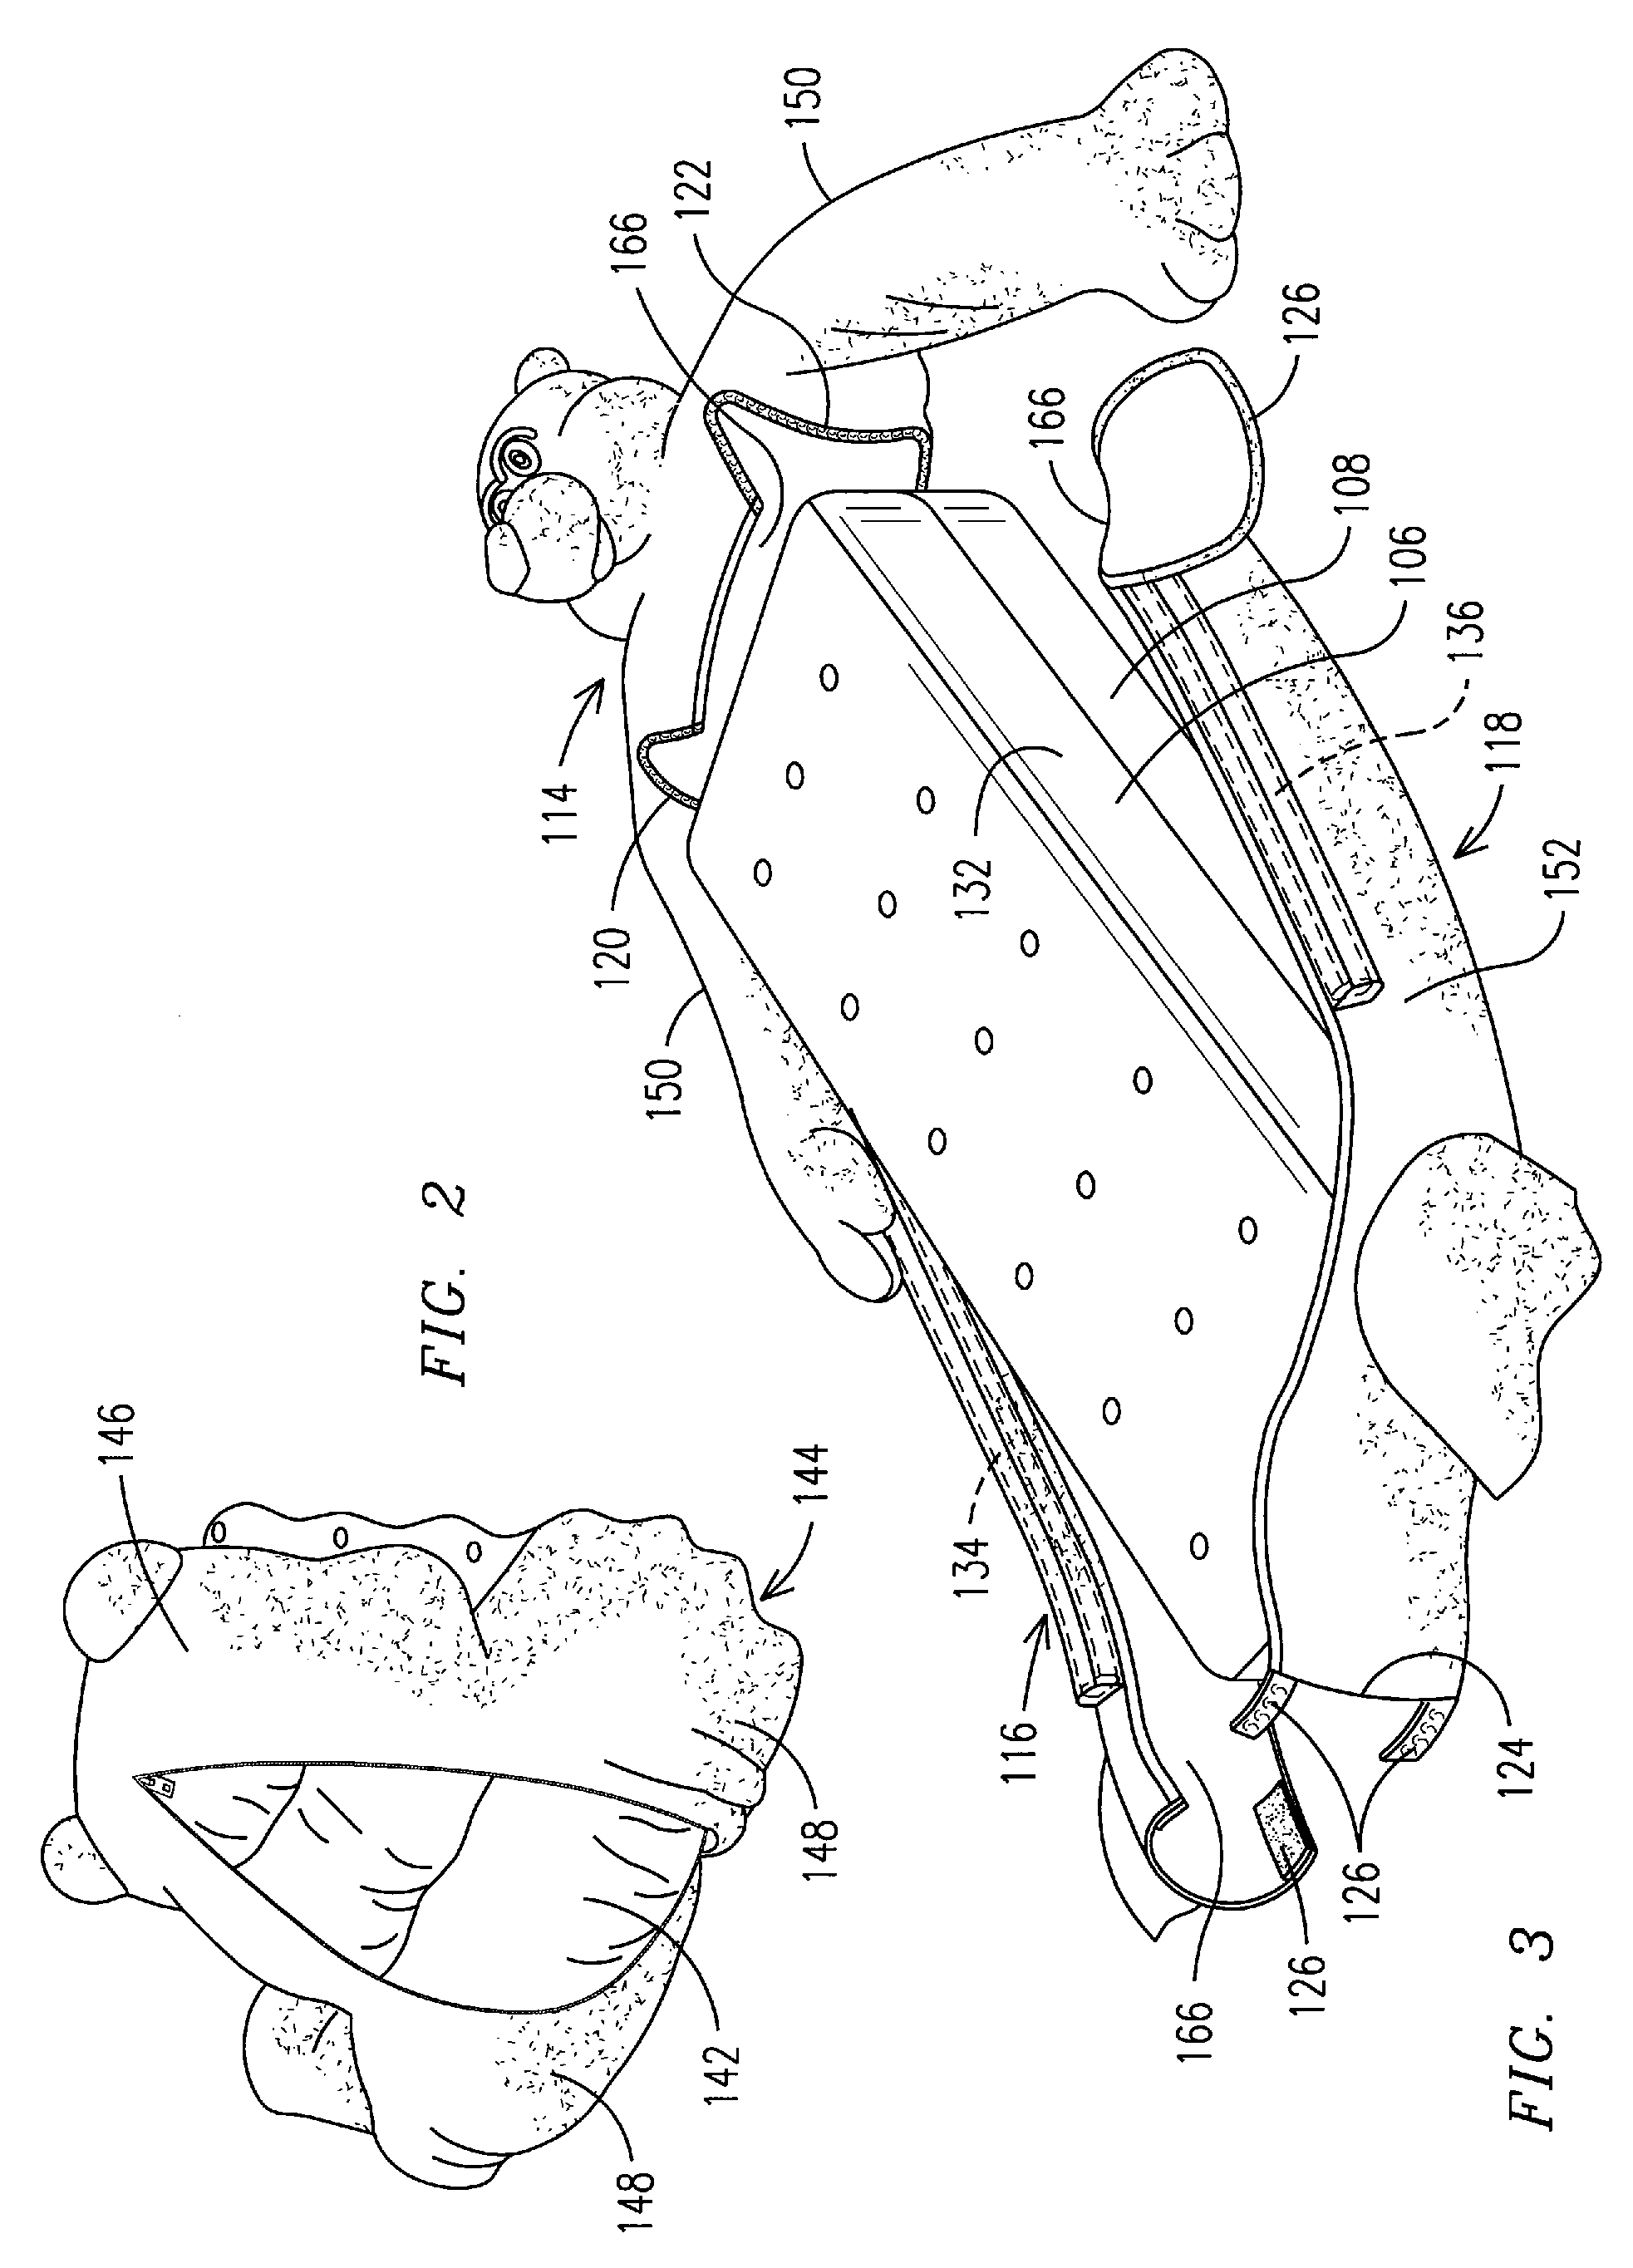 System and method for enhancing the safety of a sleeping arrangement for a child on a bed